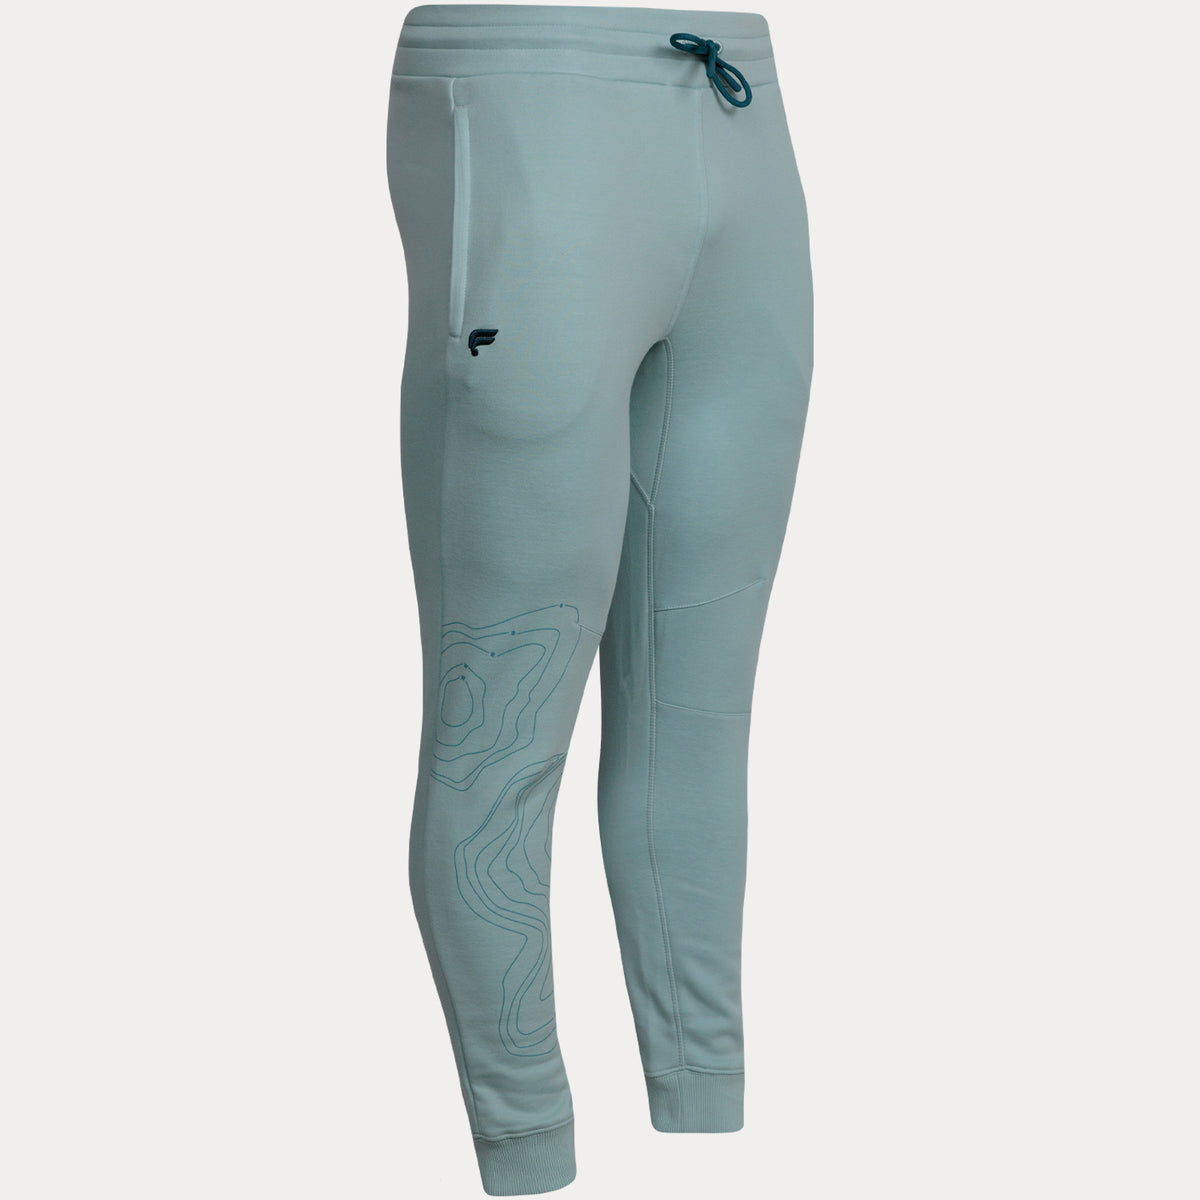 angled view of light blue jogger